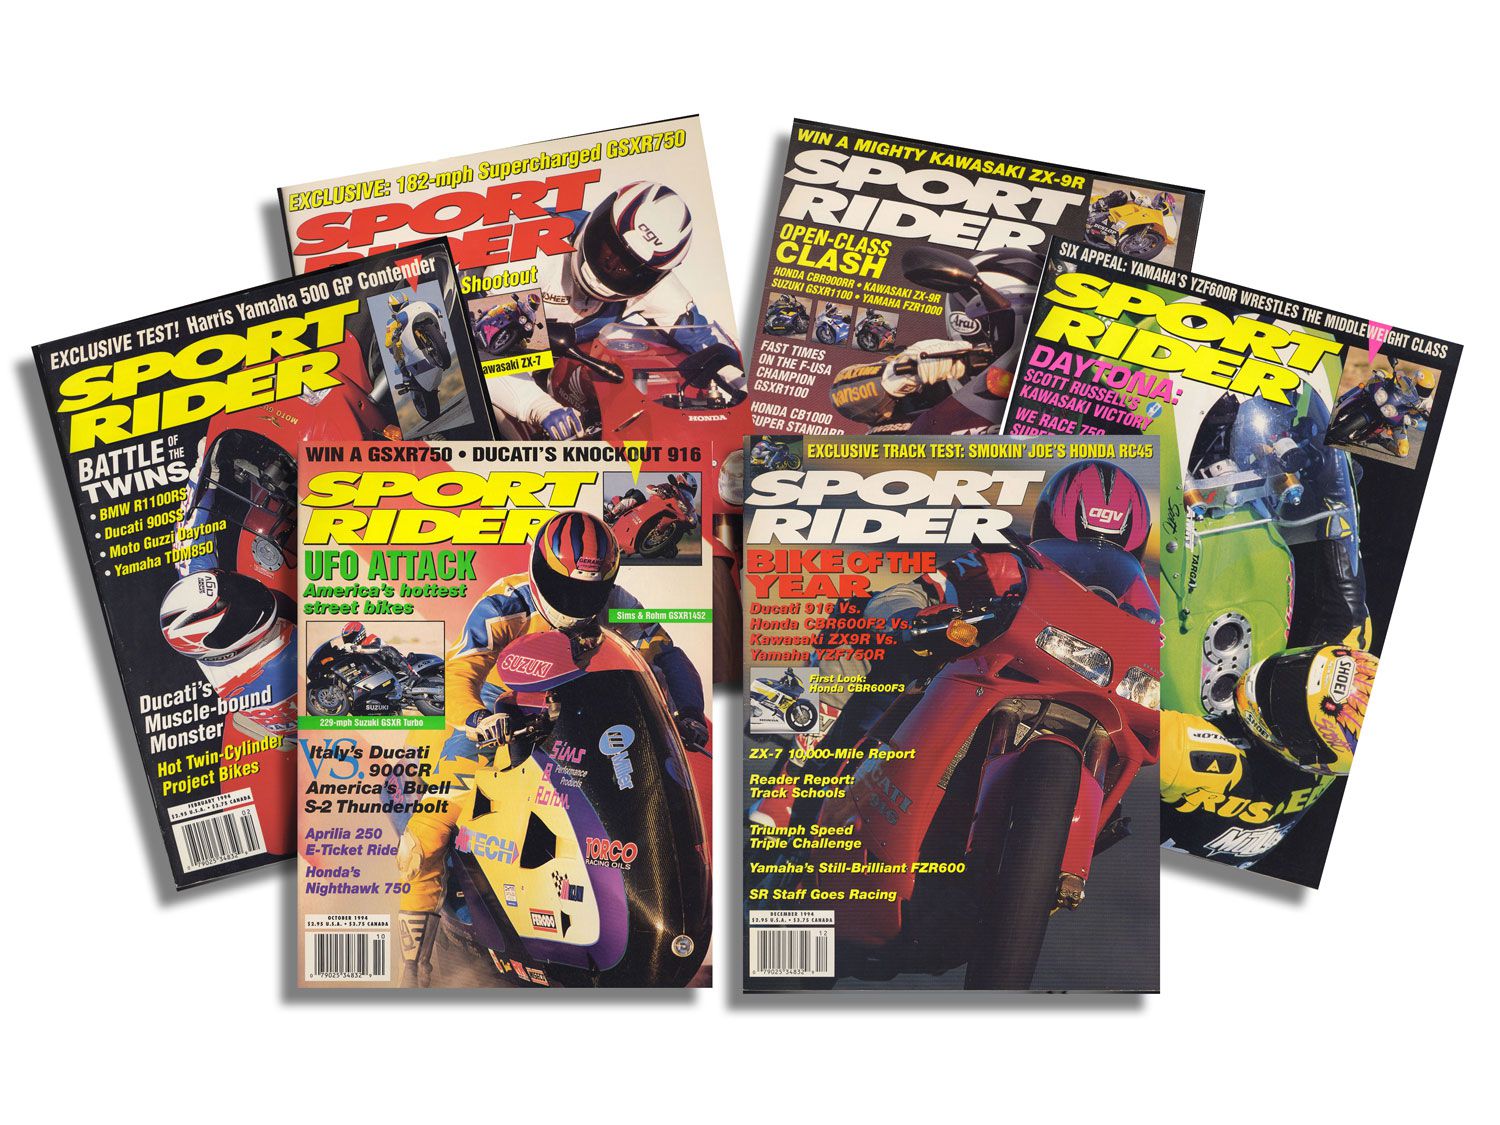 Sport Rider Covers From 1994 | Cycle World